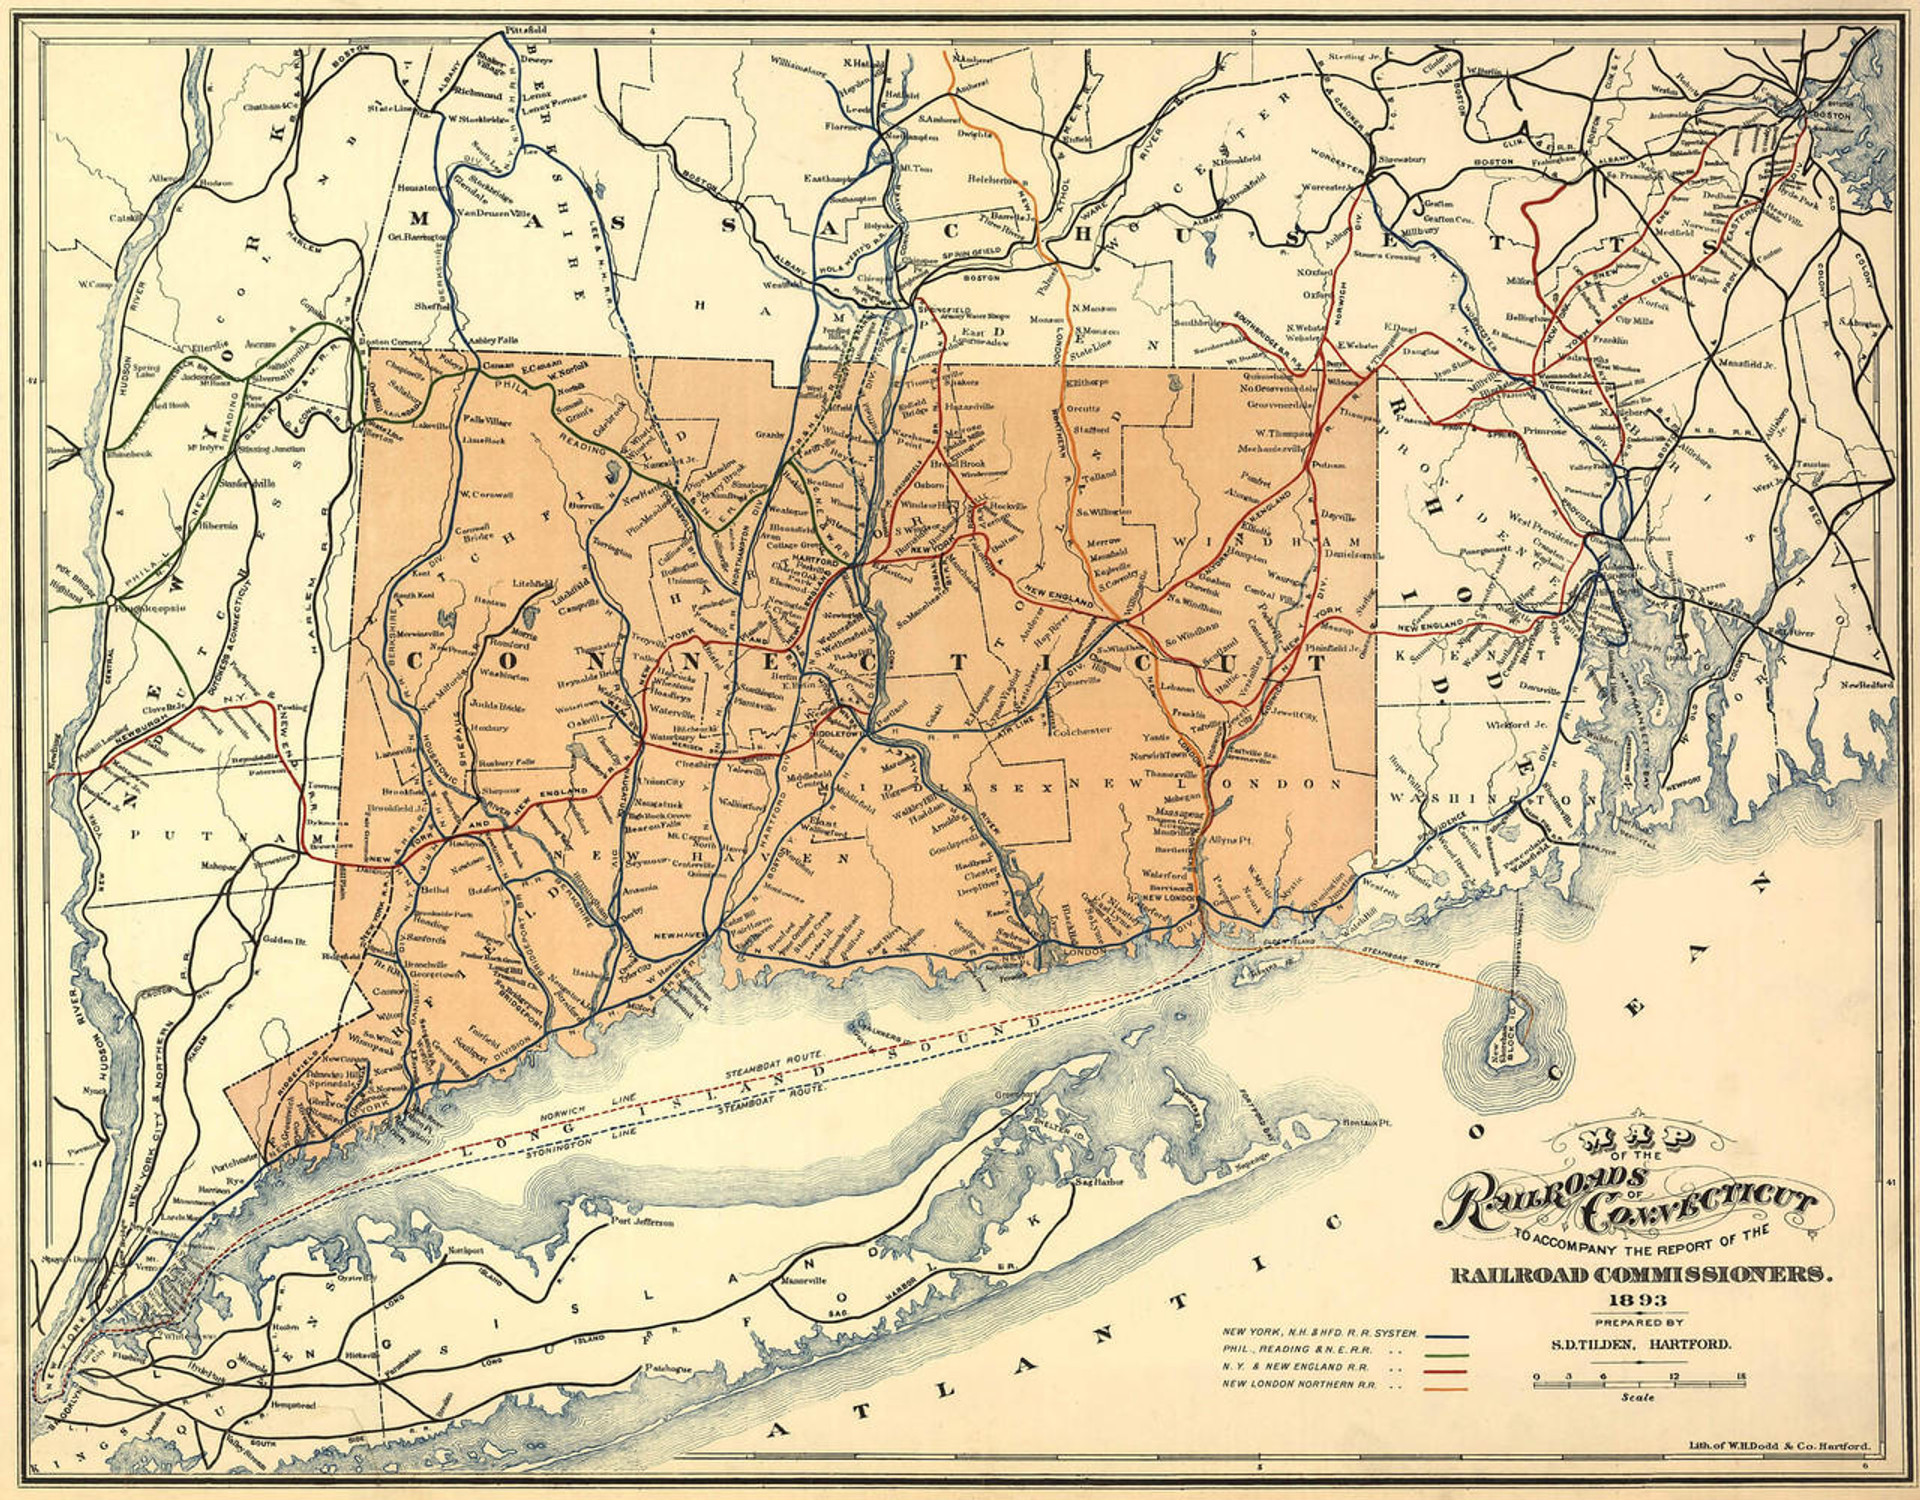 Historic Railroad Map of Connecticut - 1893, image 1, World Maps Online